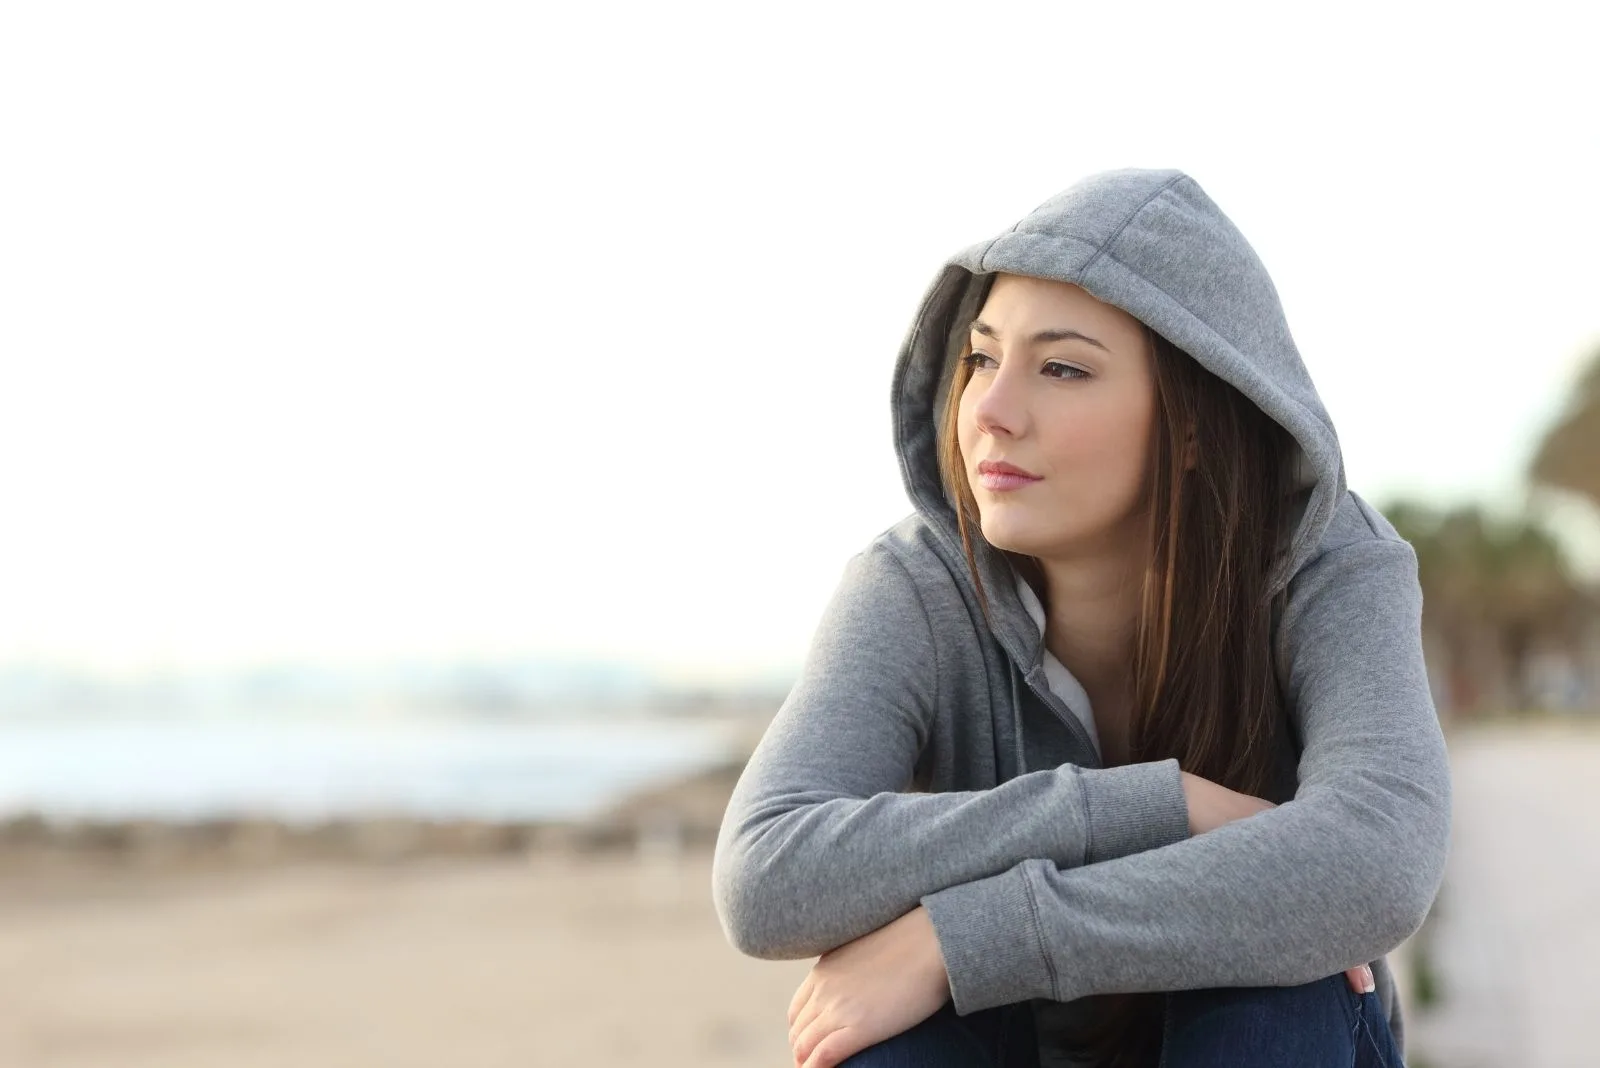 younng woman in a hoodie sitting on the beach thinking deeply